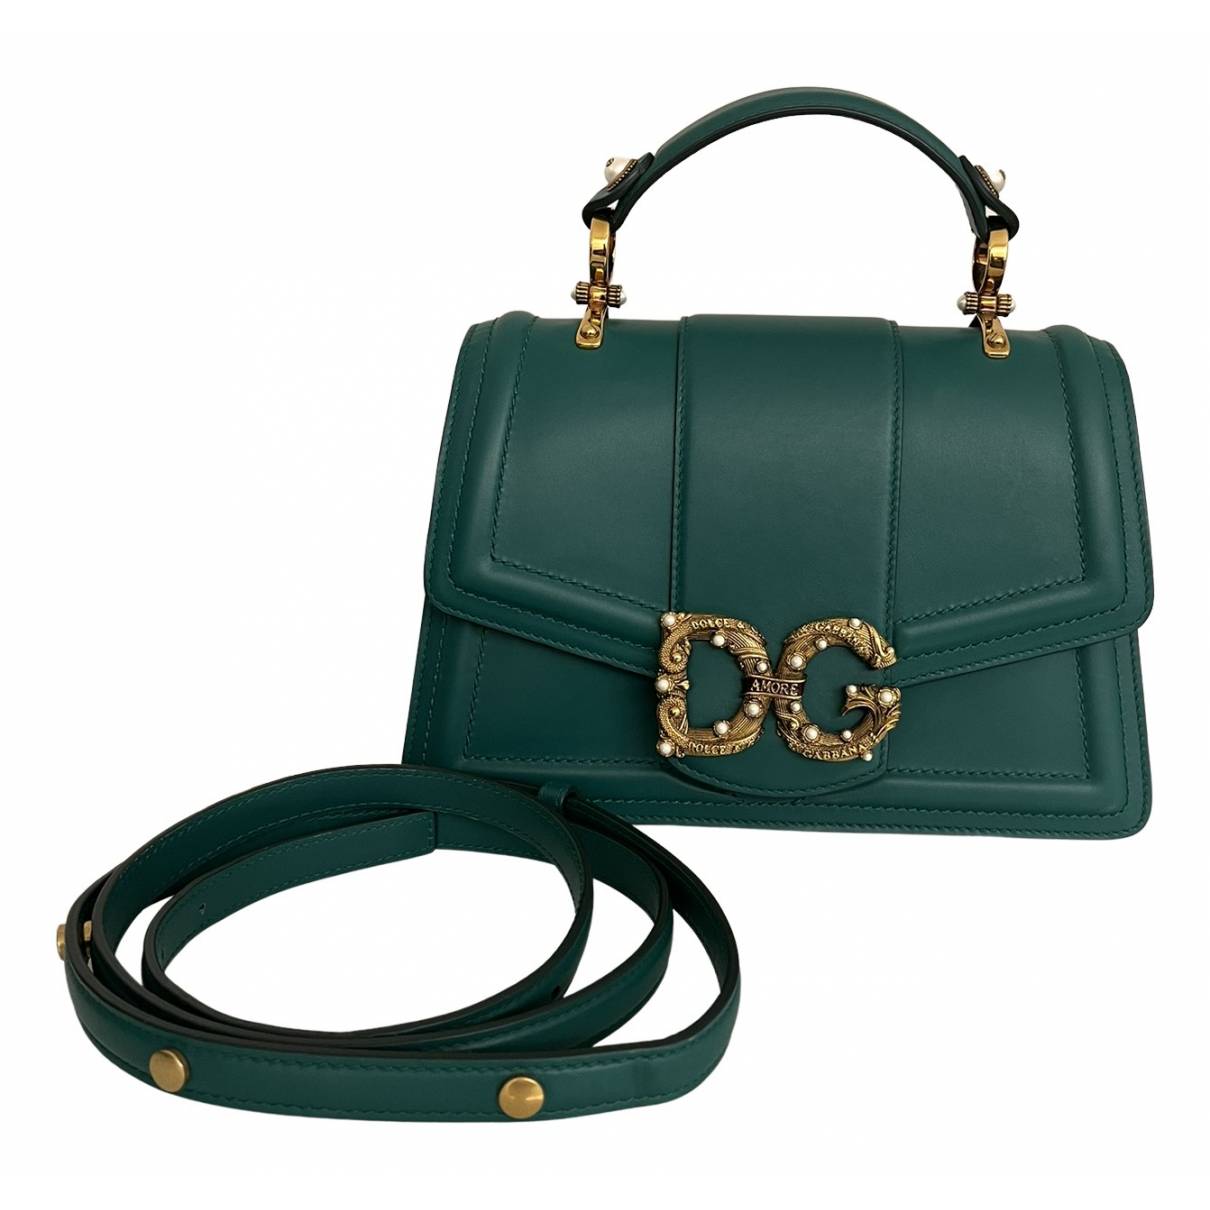 Dg amore leather tote Dolce & Gabbana Green in Leather - 28546091